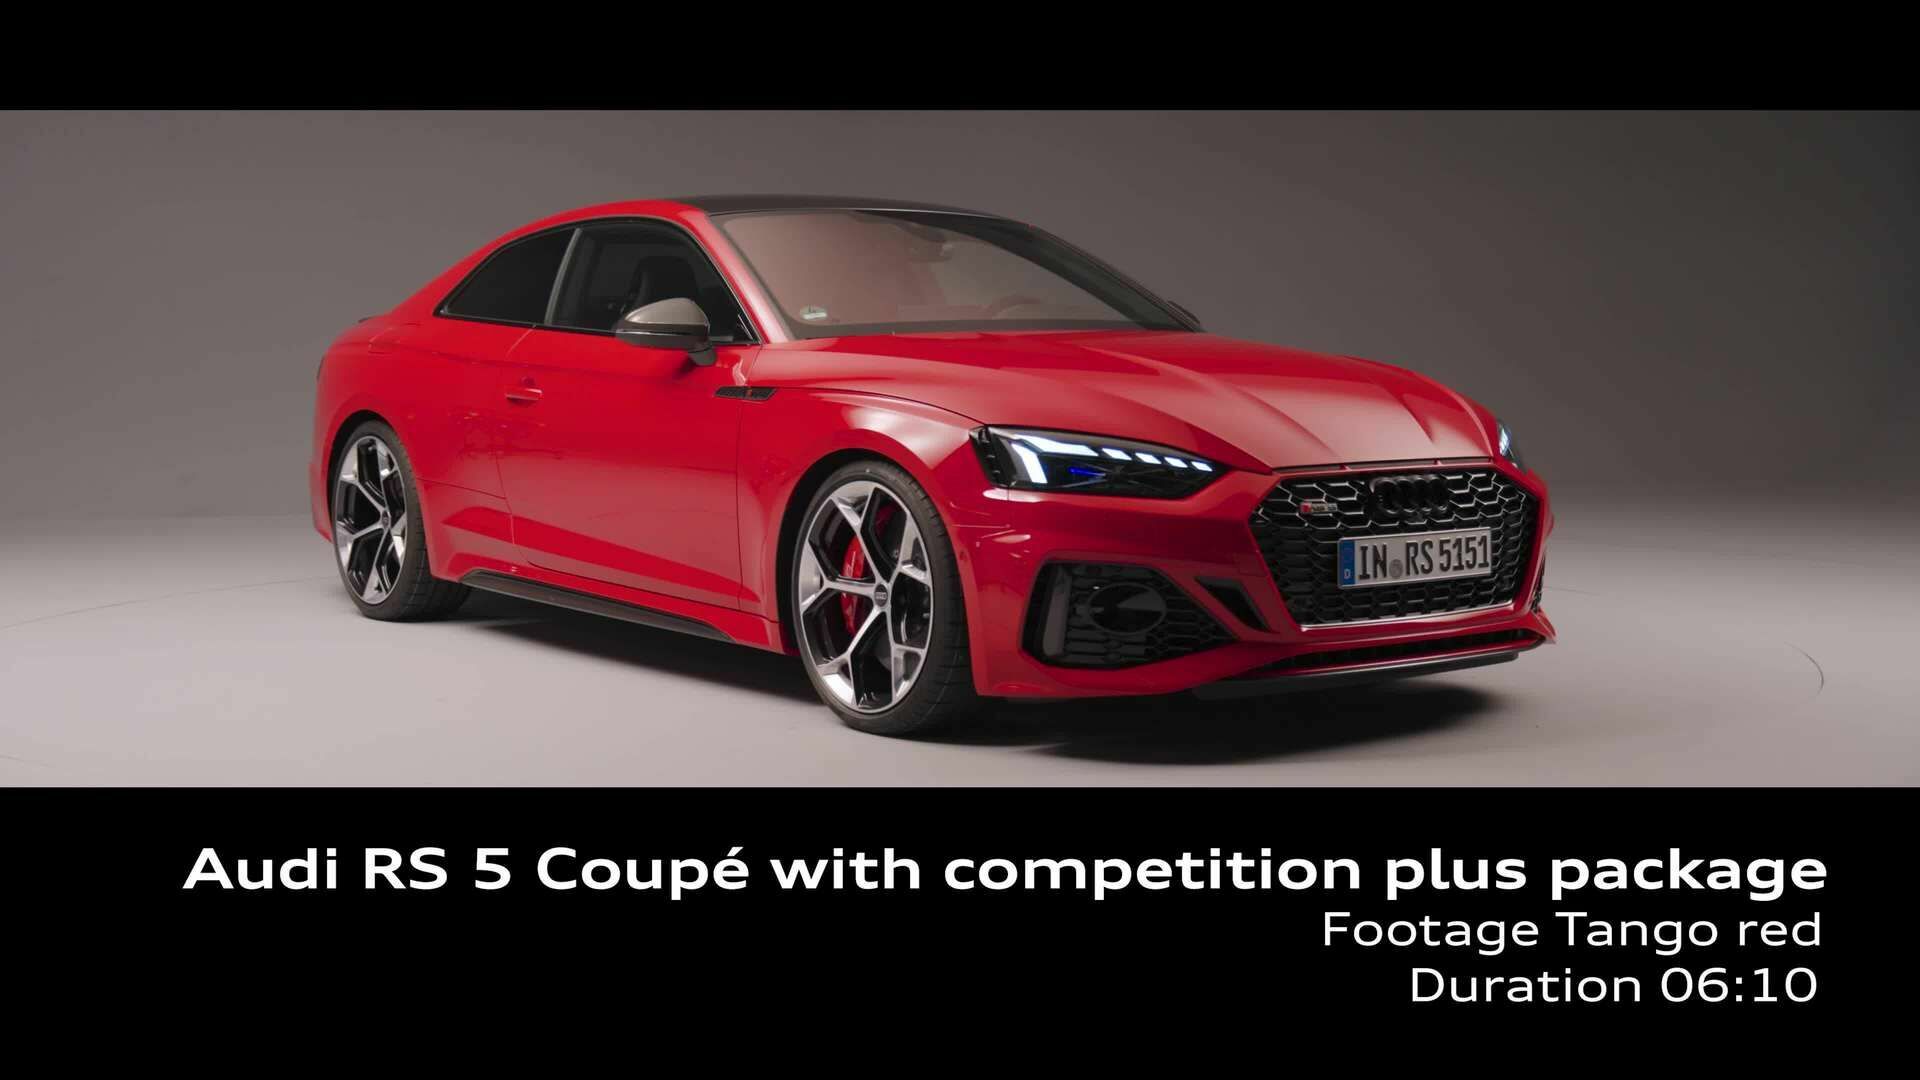 Footage: Audi RS 5 Coupé with competition plus package (Studio)